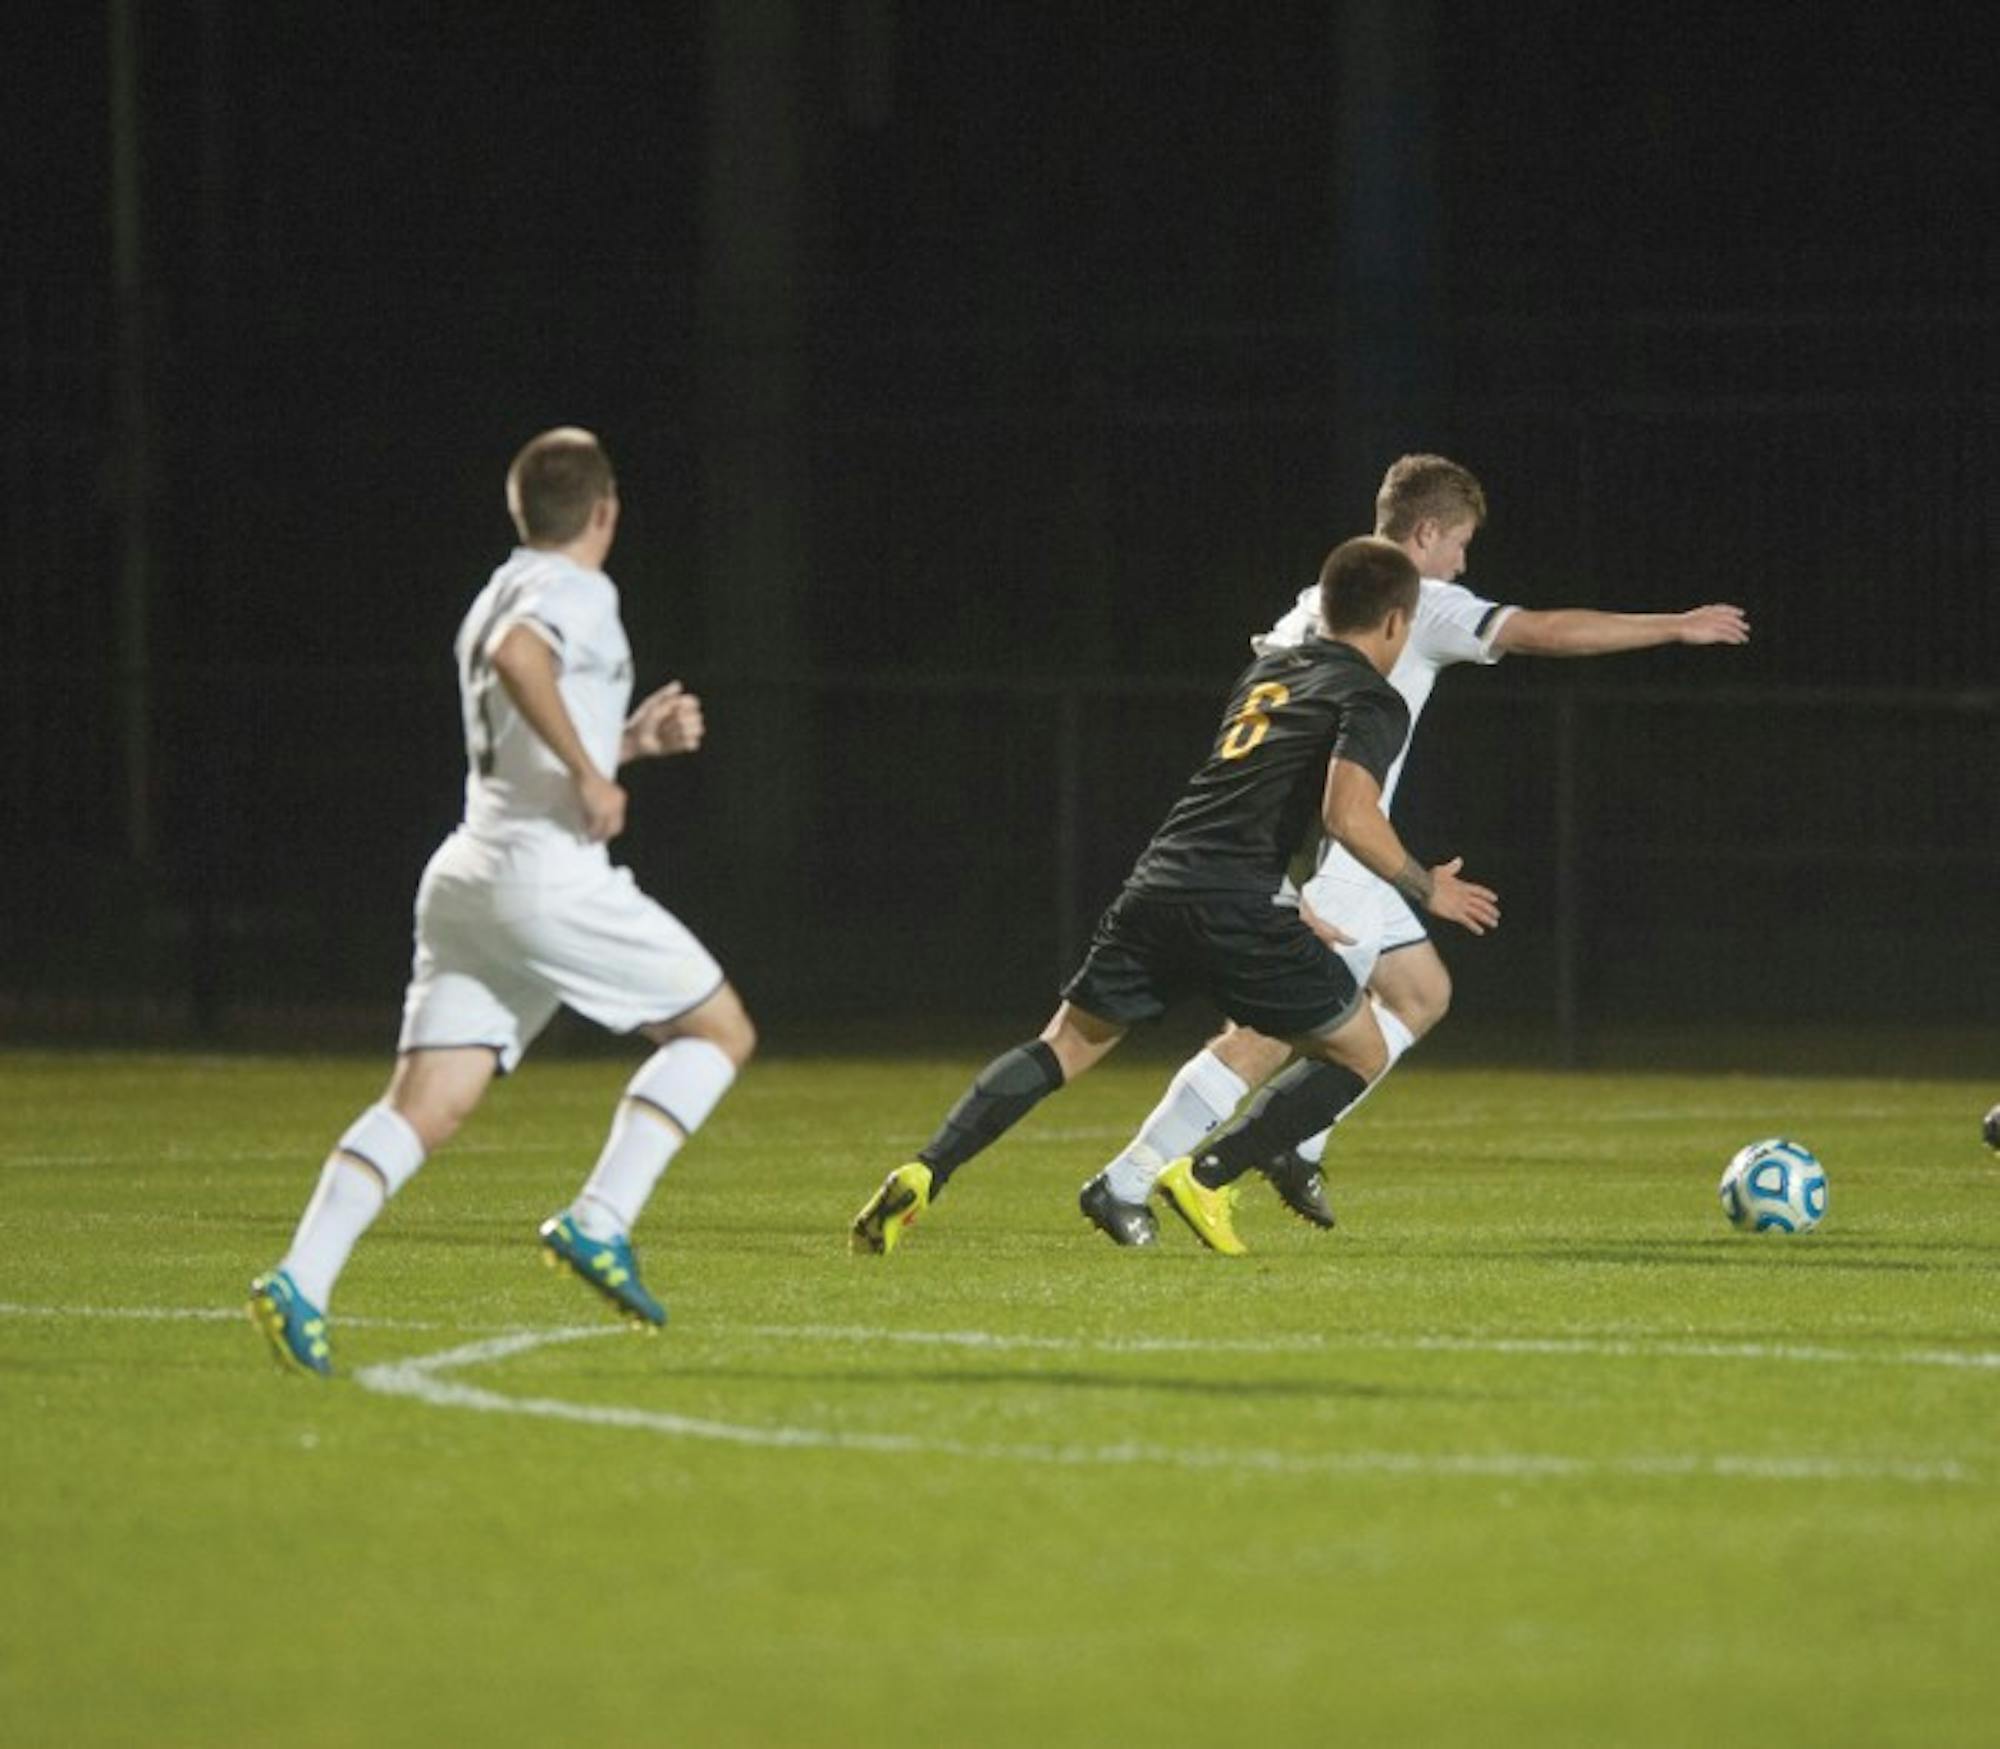 Irish freshman forward Jon Gallagher races towards the ball in a 1-0, double-overtime victory against VCU on Tuesday at Alumni Stadium. Gallagher recorded one shot in Friday’s loss to Boston College.